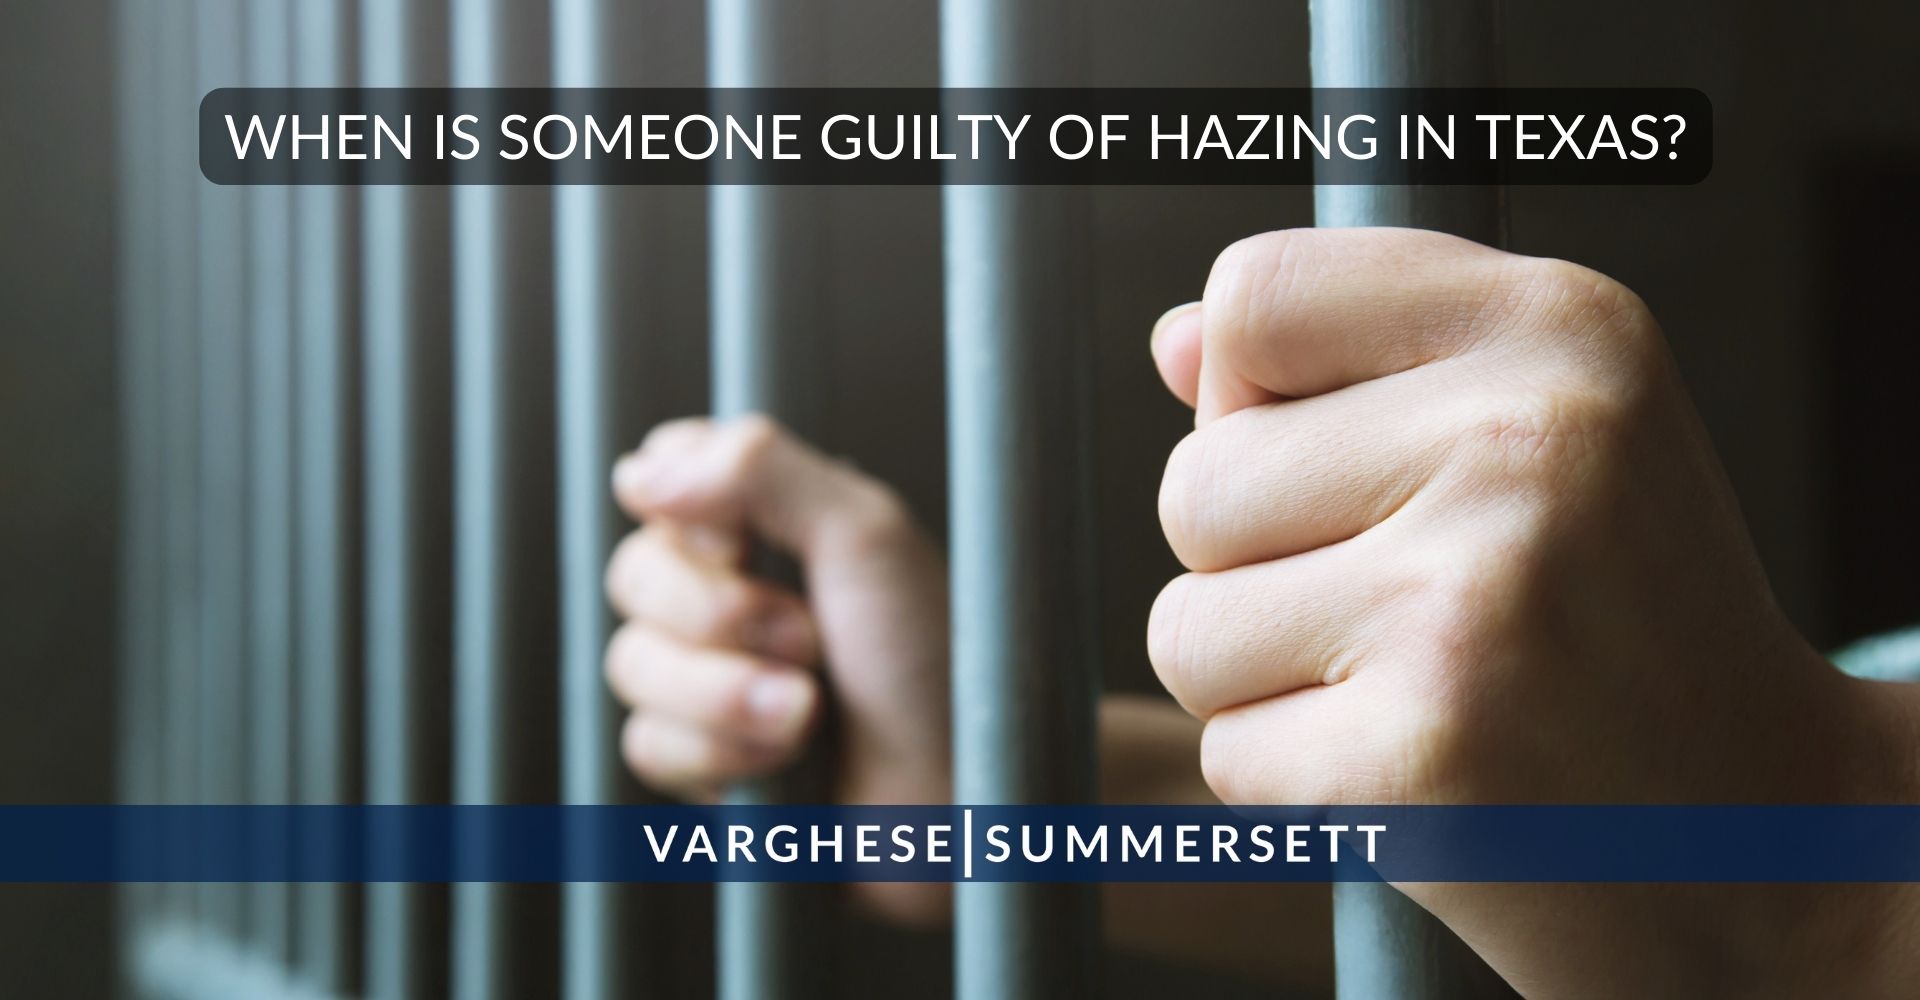 When is someone guilty of hazing in Texas?